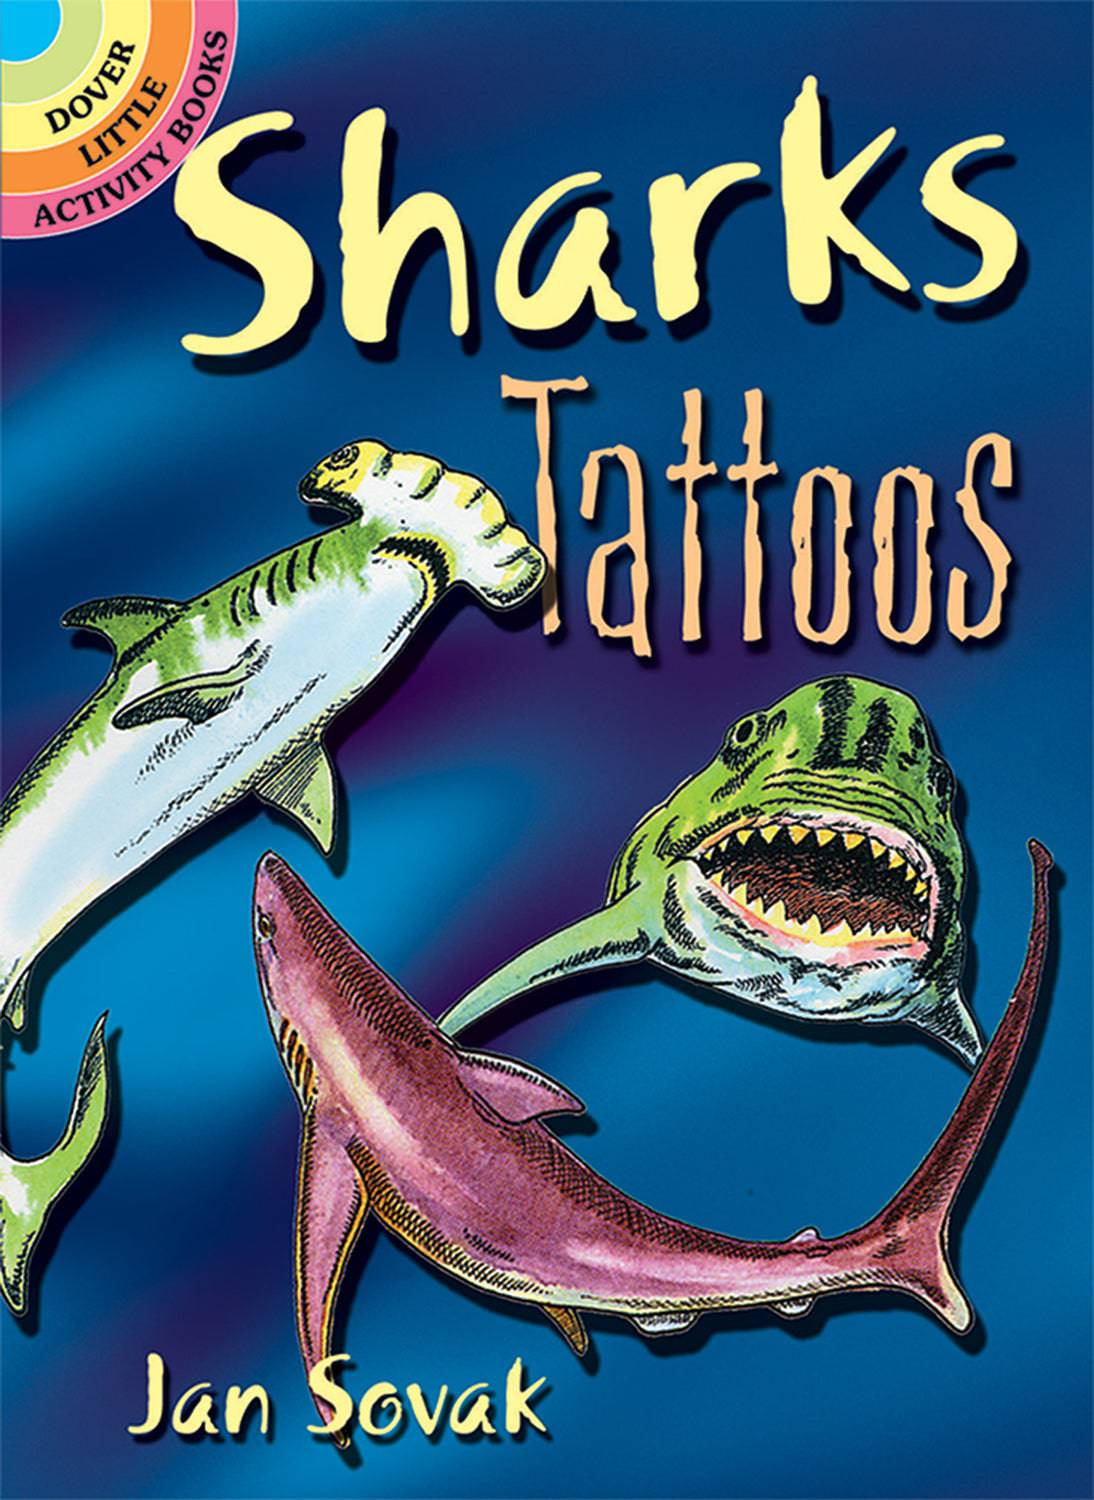 40243SHARKS TATTOO - A Child's Delight